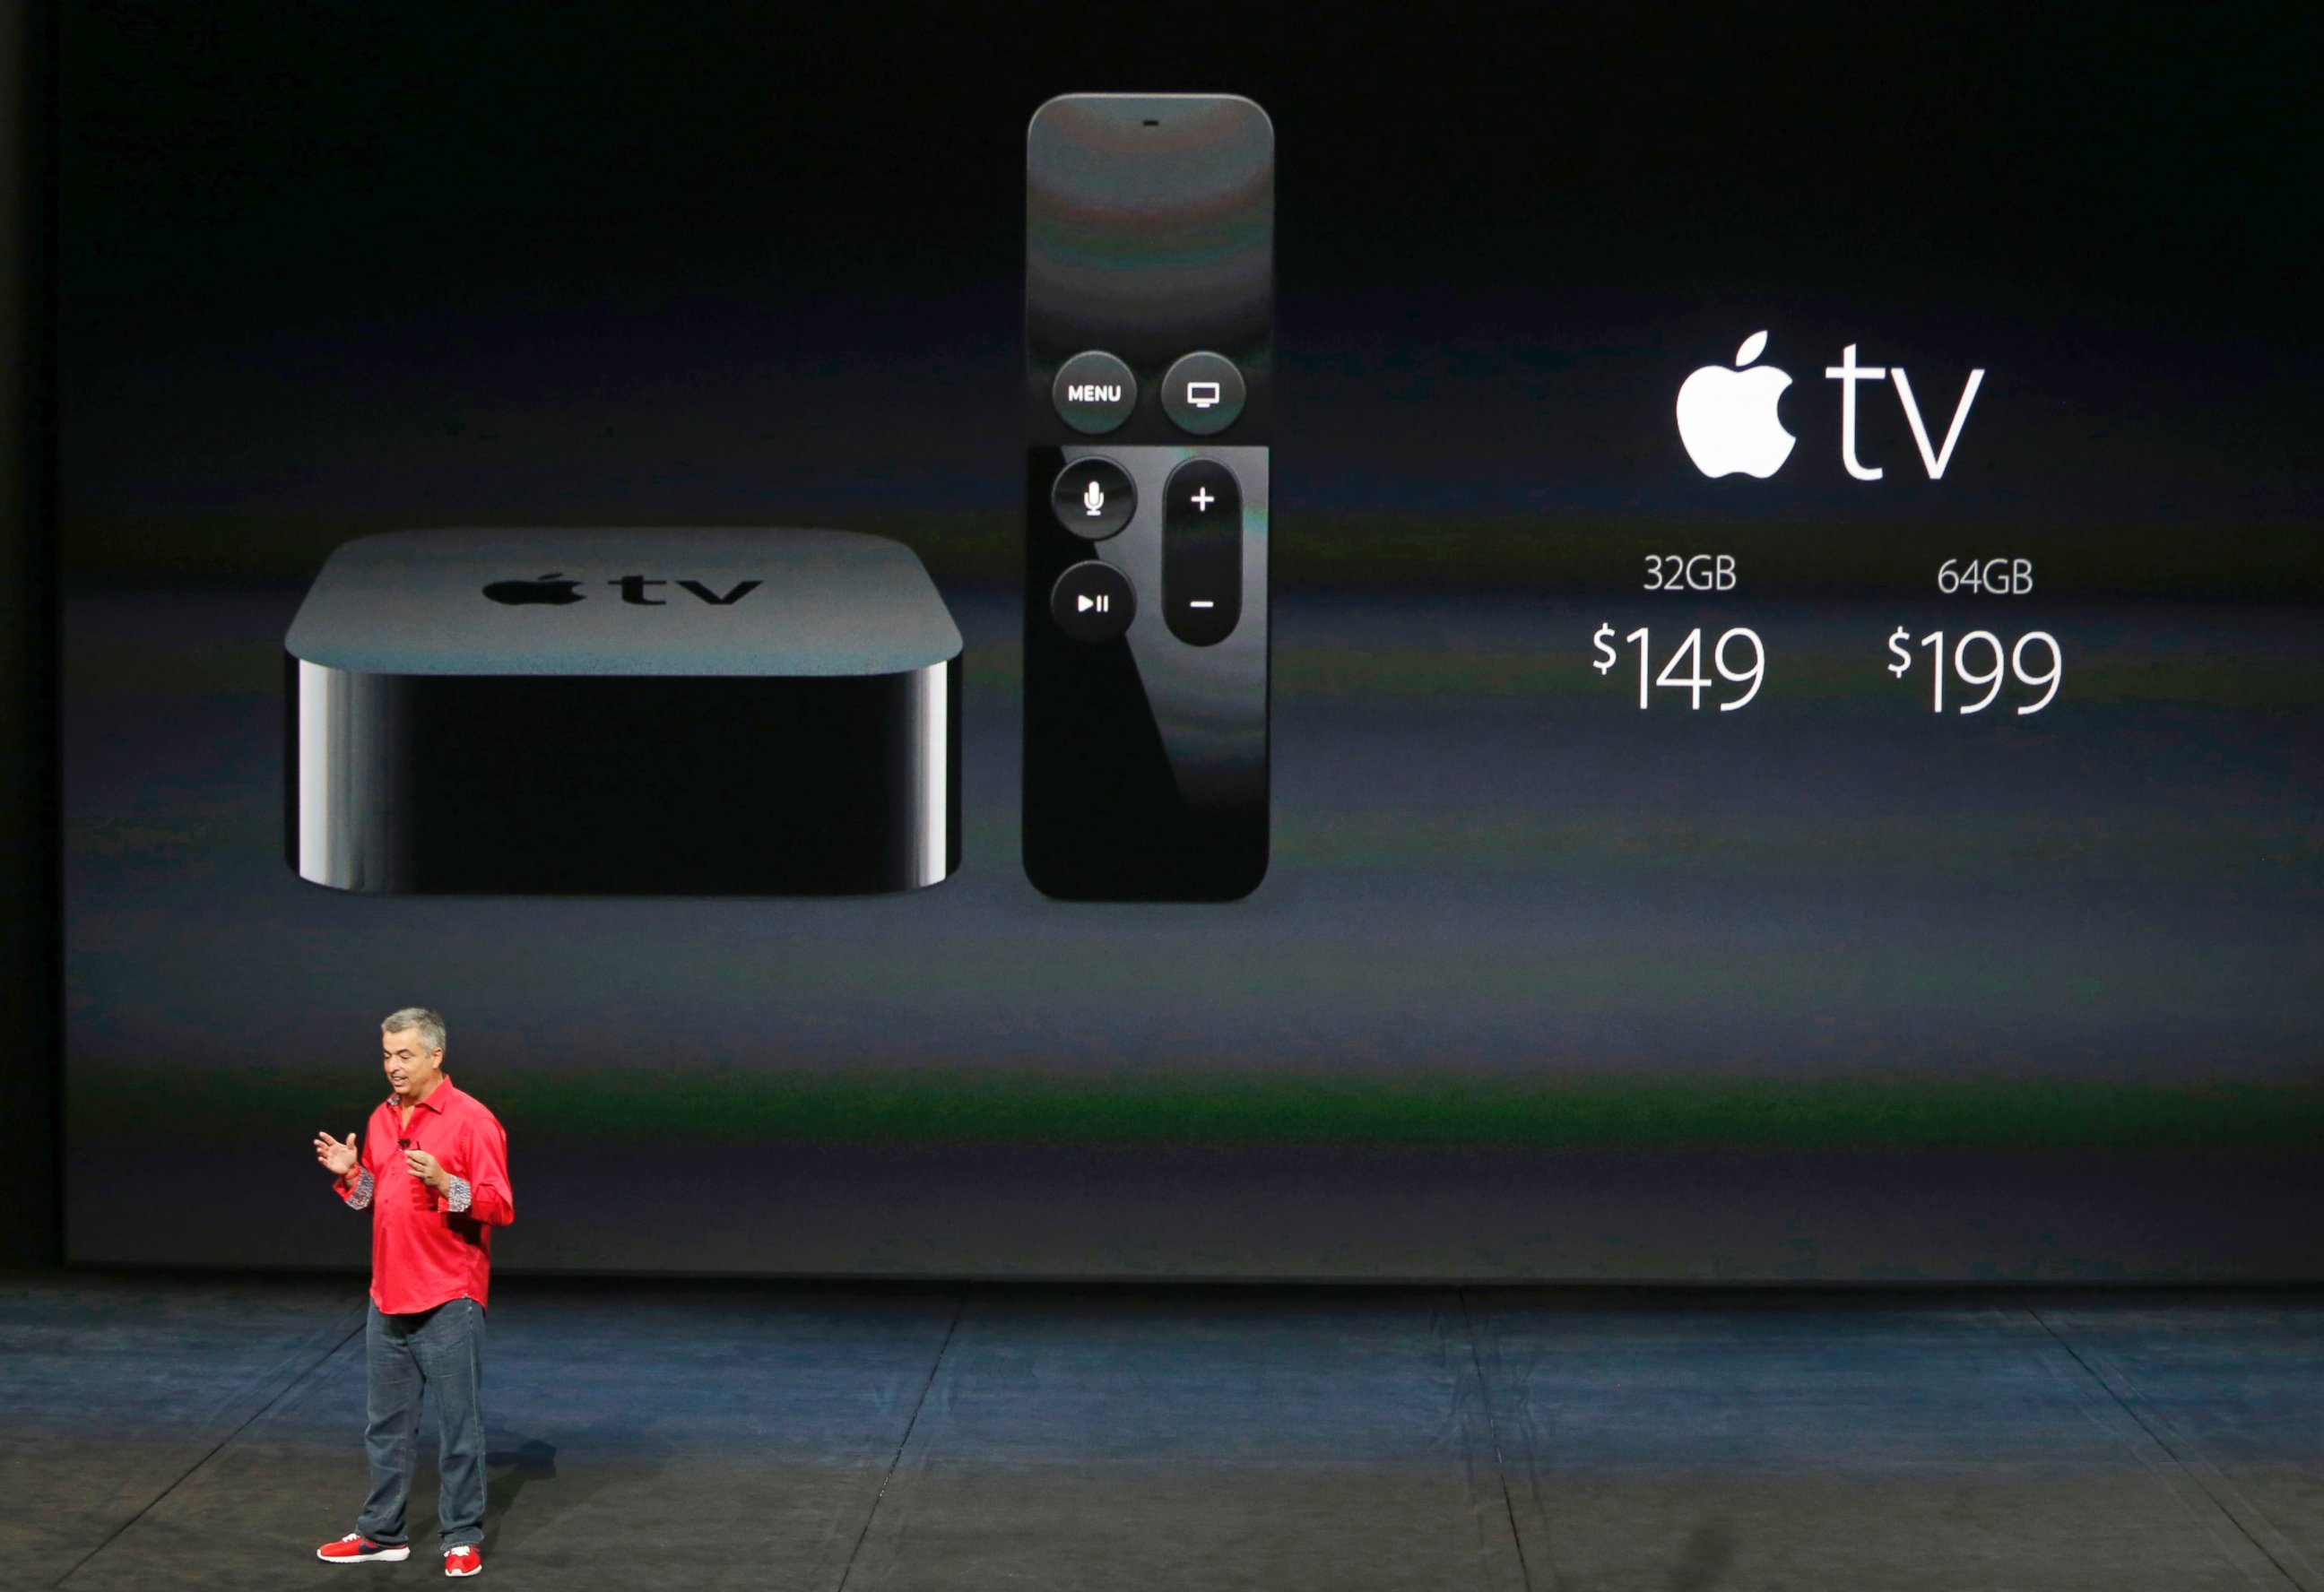 PHOTO: Eddie Cue, Apple's senior vice president of Internet Software and Services, discusses Apple TV pricing during an Apple media event in San Francisco, Sept. 9, 2015.